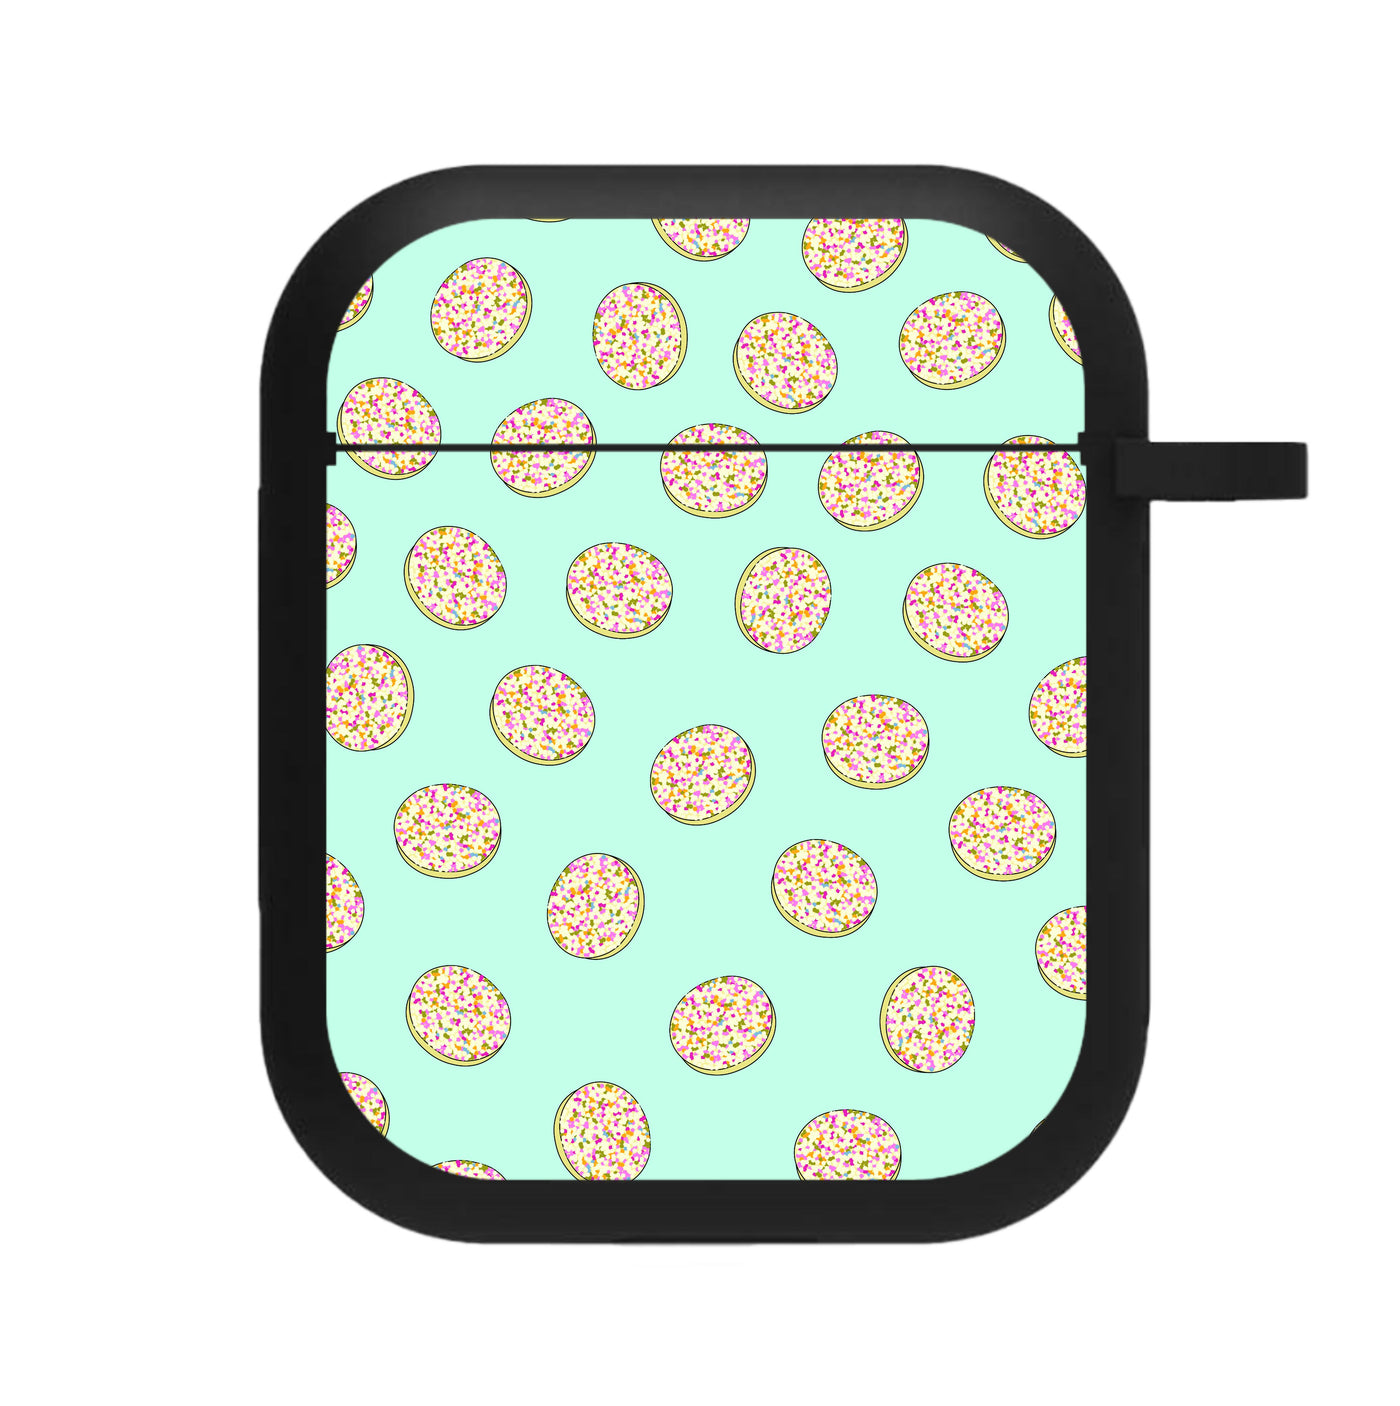 Jazzles - Sweets Patterns AirPods Case